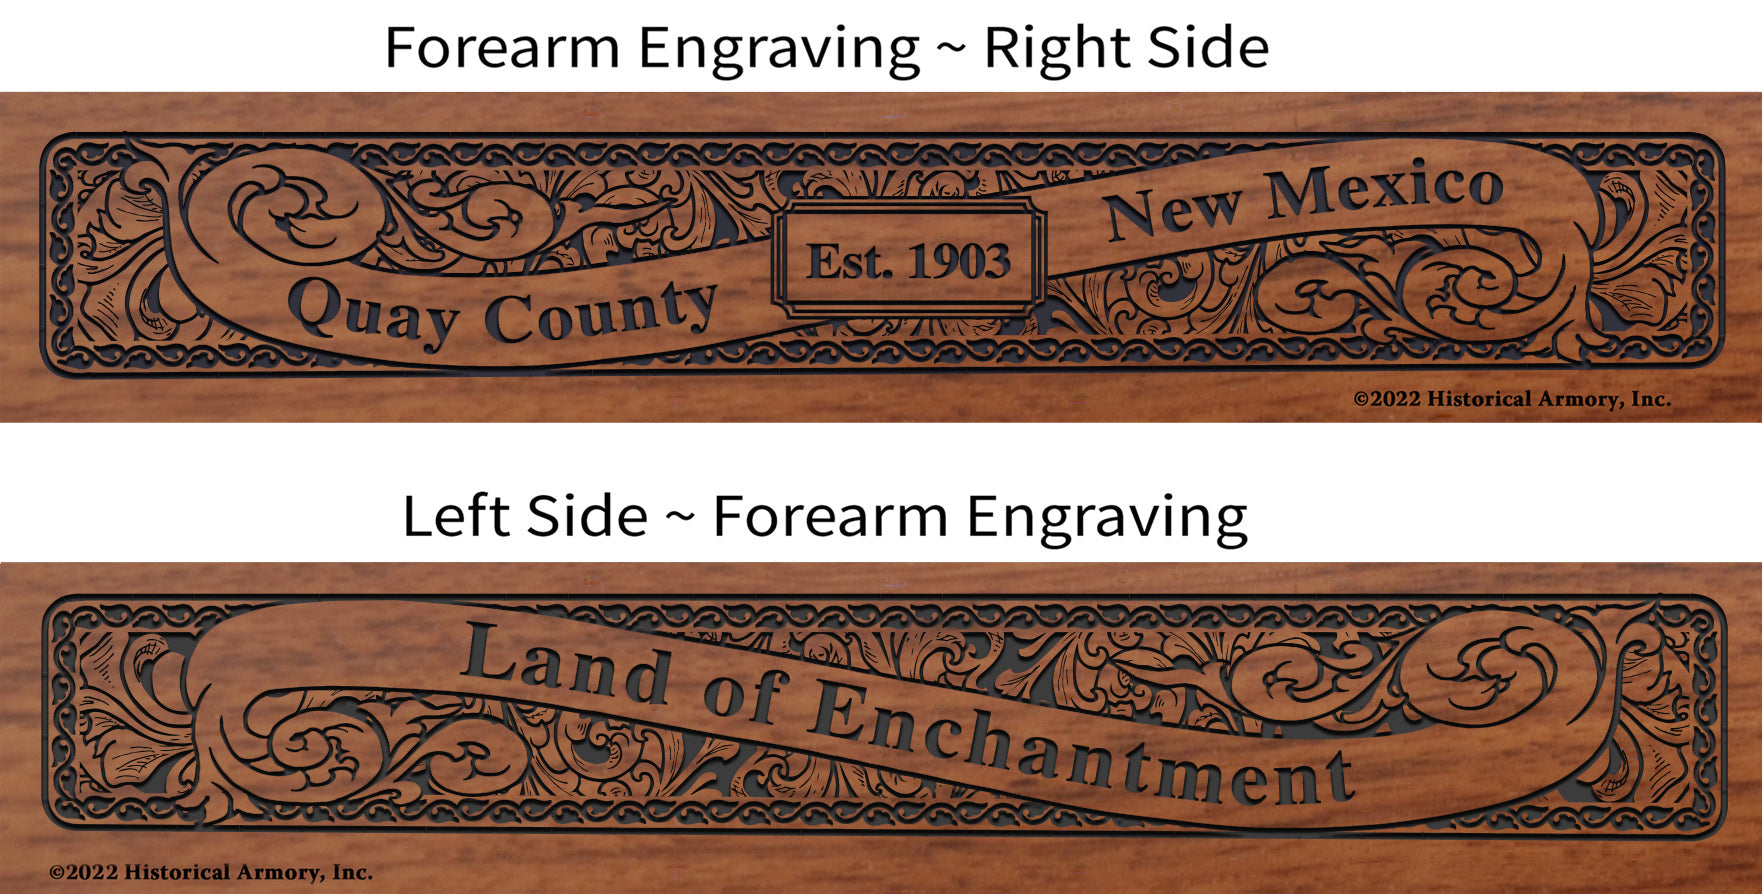 Quay County New Mexico Engraved Rifle Forearm